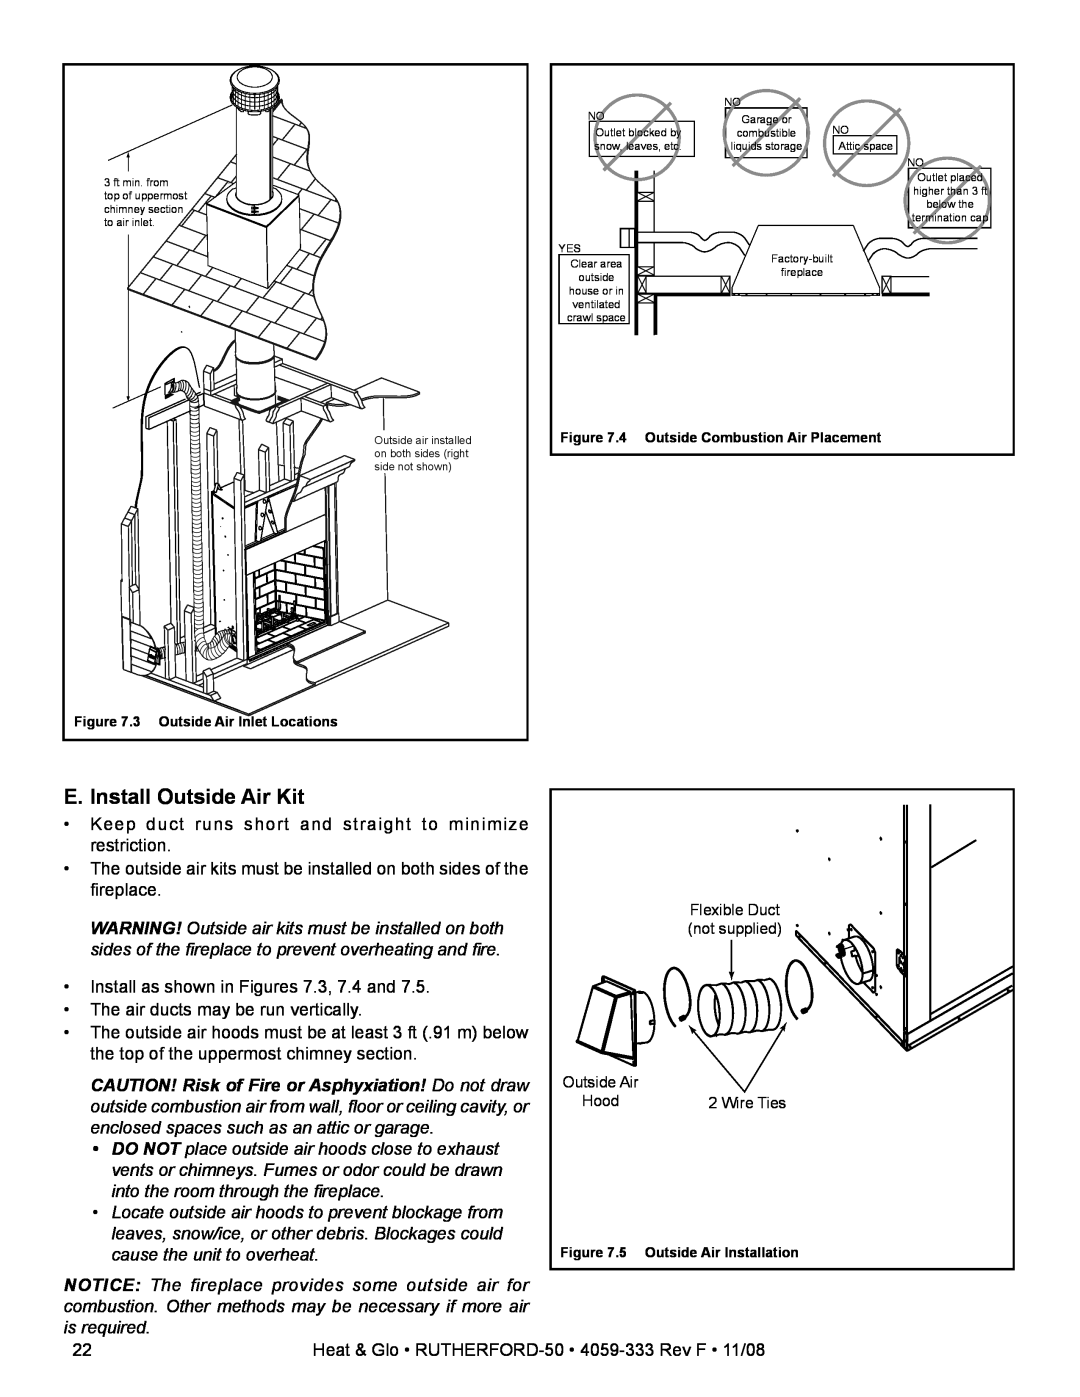 Hearth and Home Technologies RUTHERFORD-50 E. Install Outside Air Kit, Install as shown in Figures 7.3, 7.4 and 